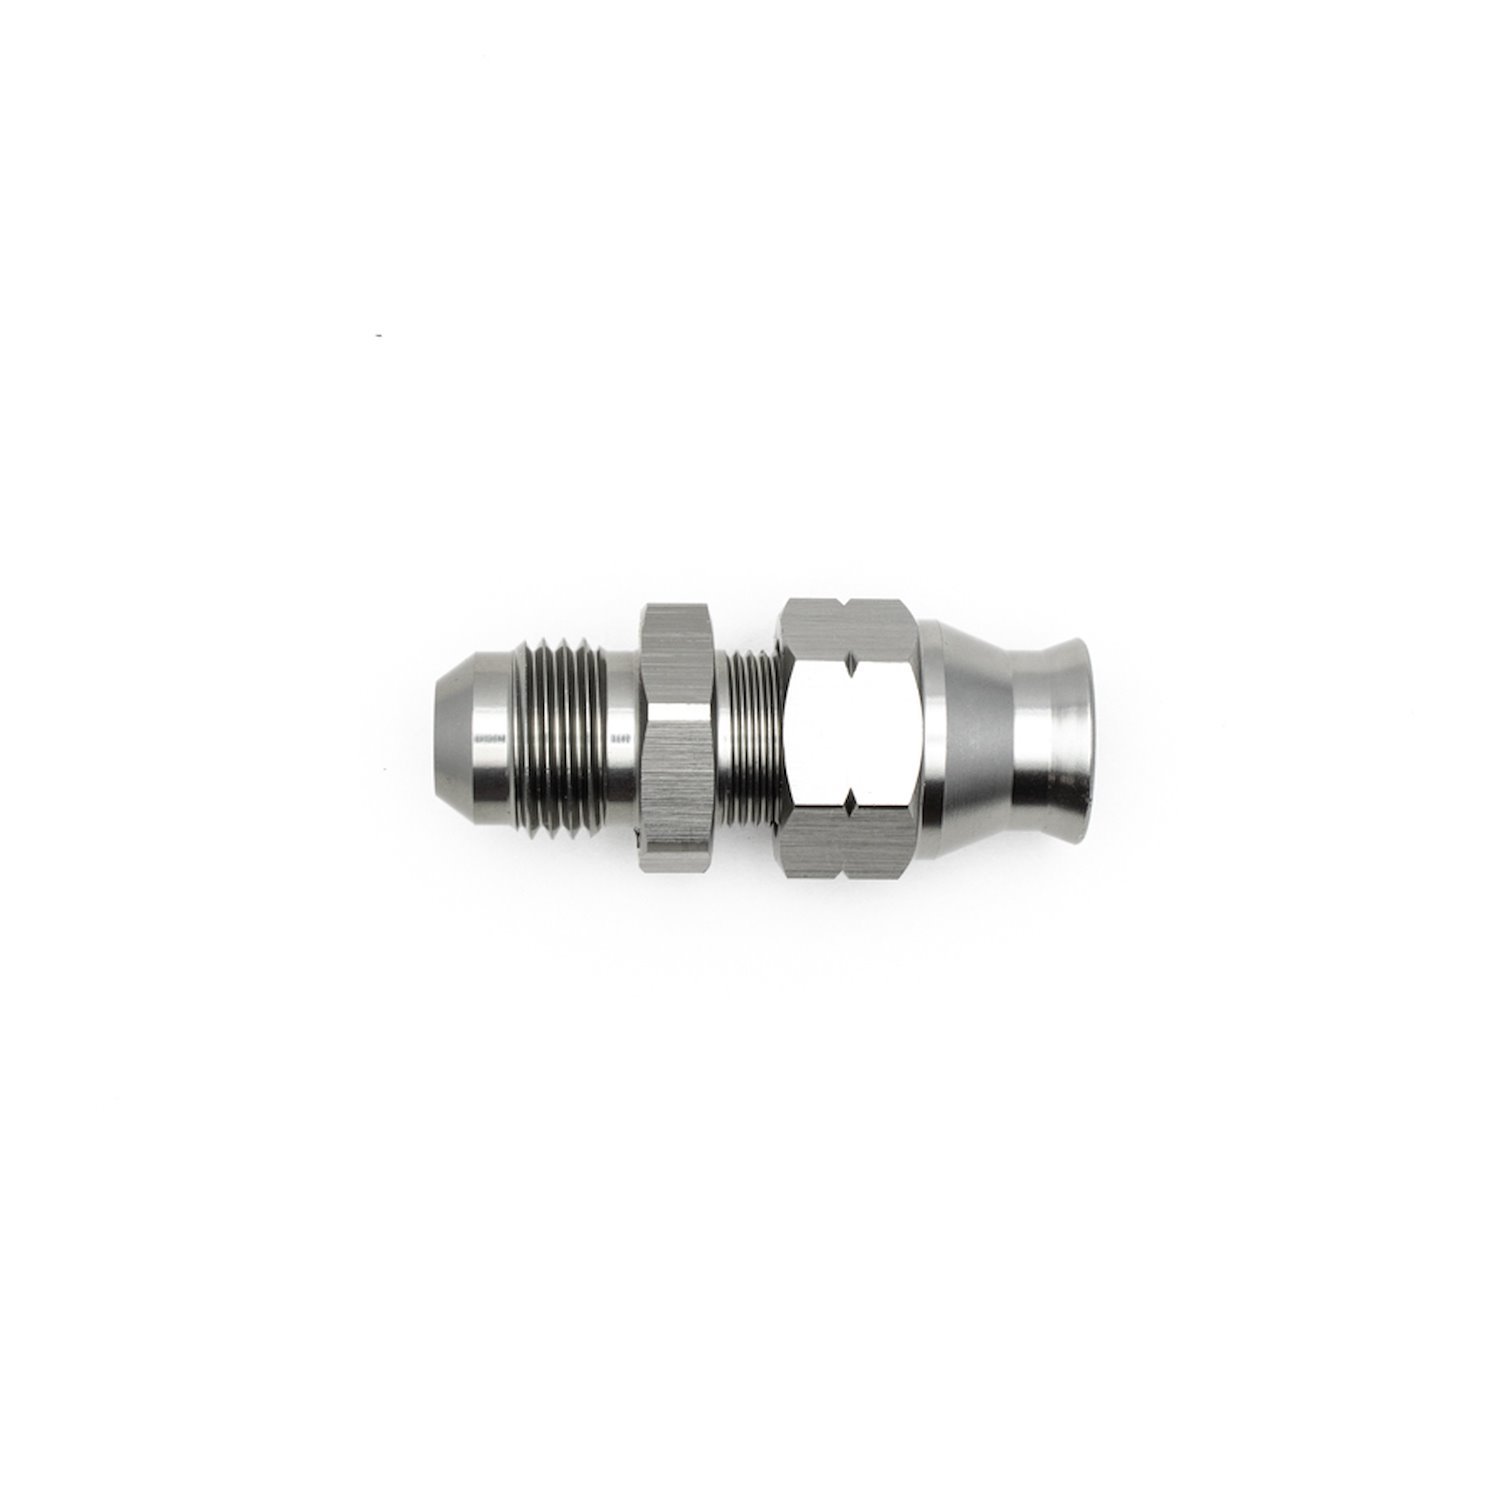 6020108 6AN Male Flare to 5/16 Inch Hardline Compression Adapter (Incl 1 Olive Insert) Anodized DW Titanium